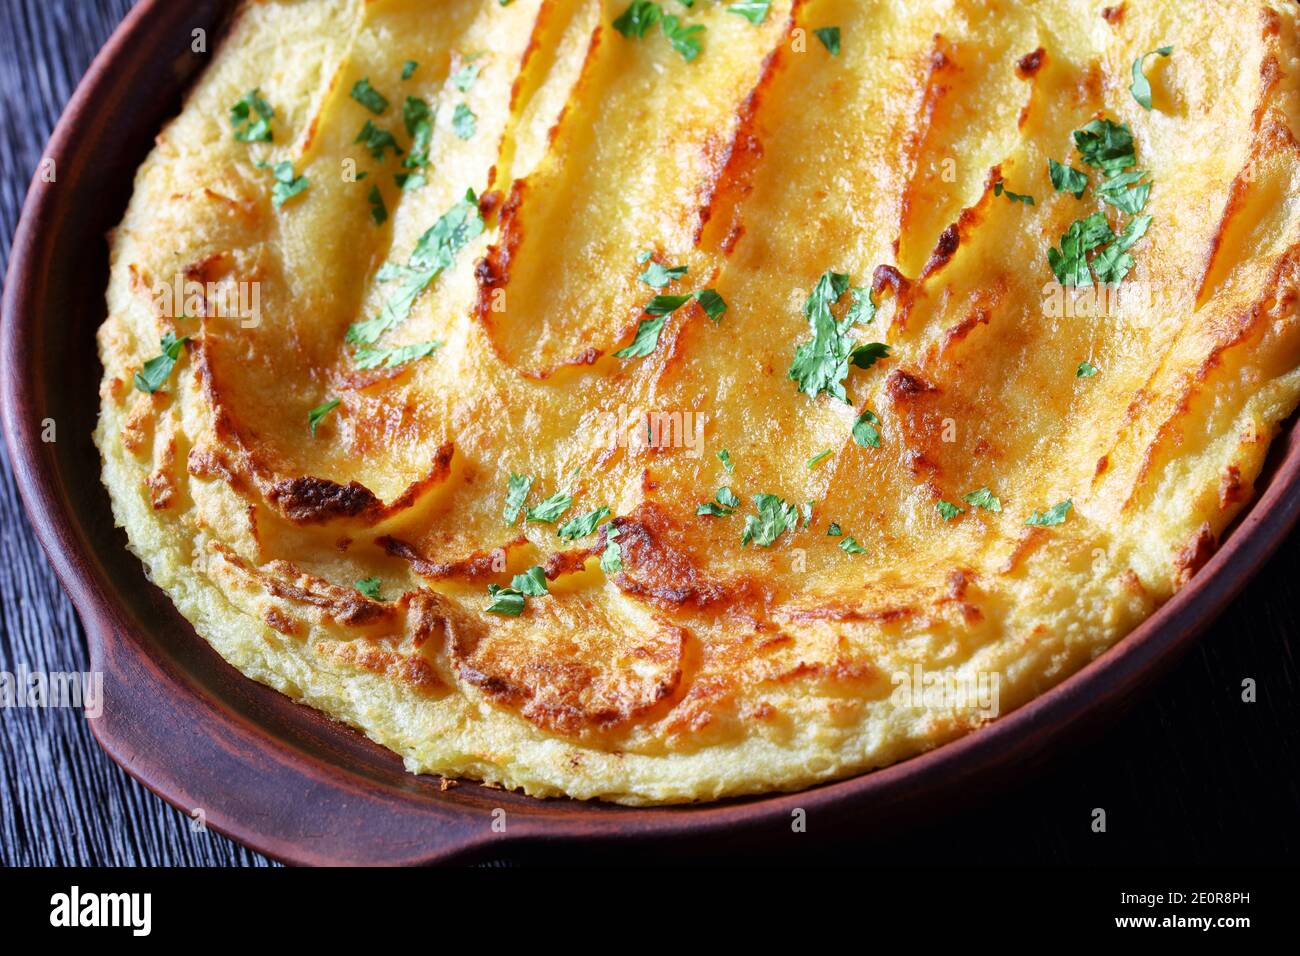 Garlic Parmesan Mashed Potato Casserole sprinkled with parsley in a dish on dark wooden table, horizontal view from above, close-up Stock Photo